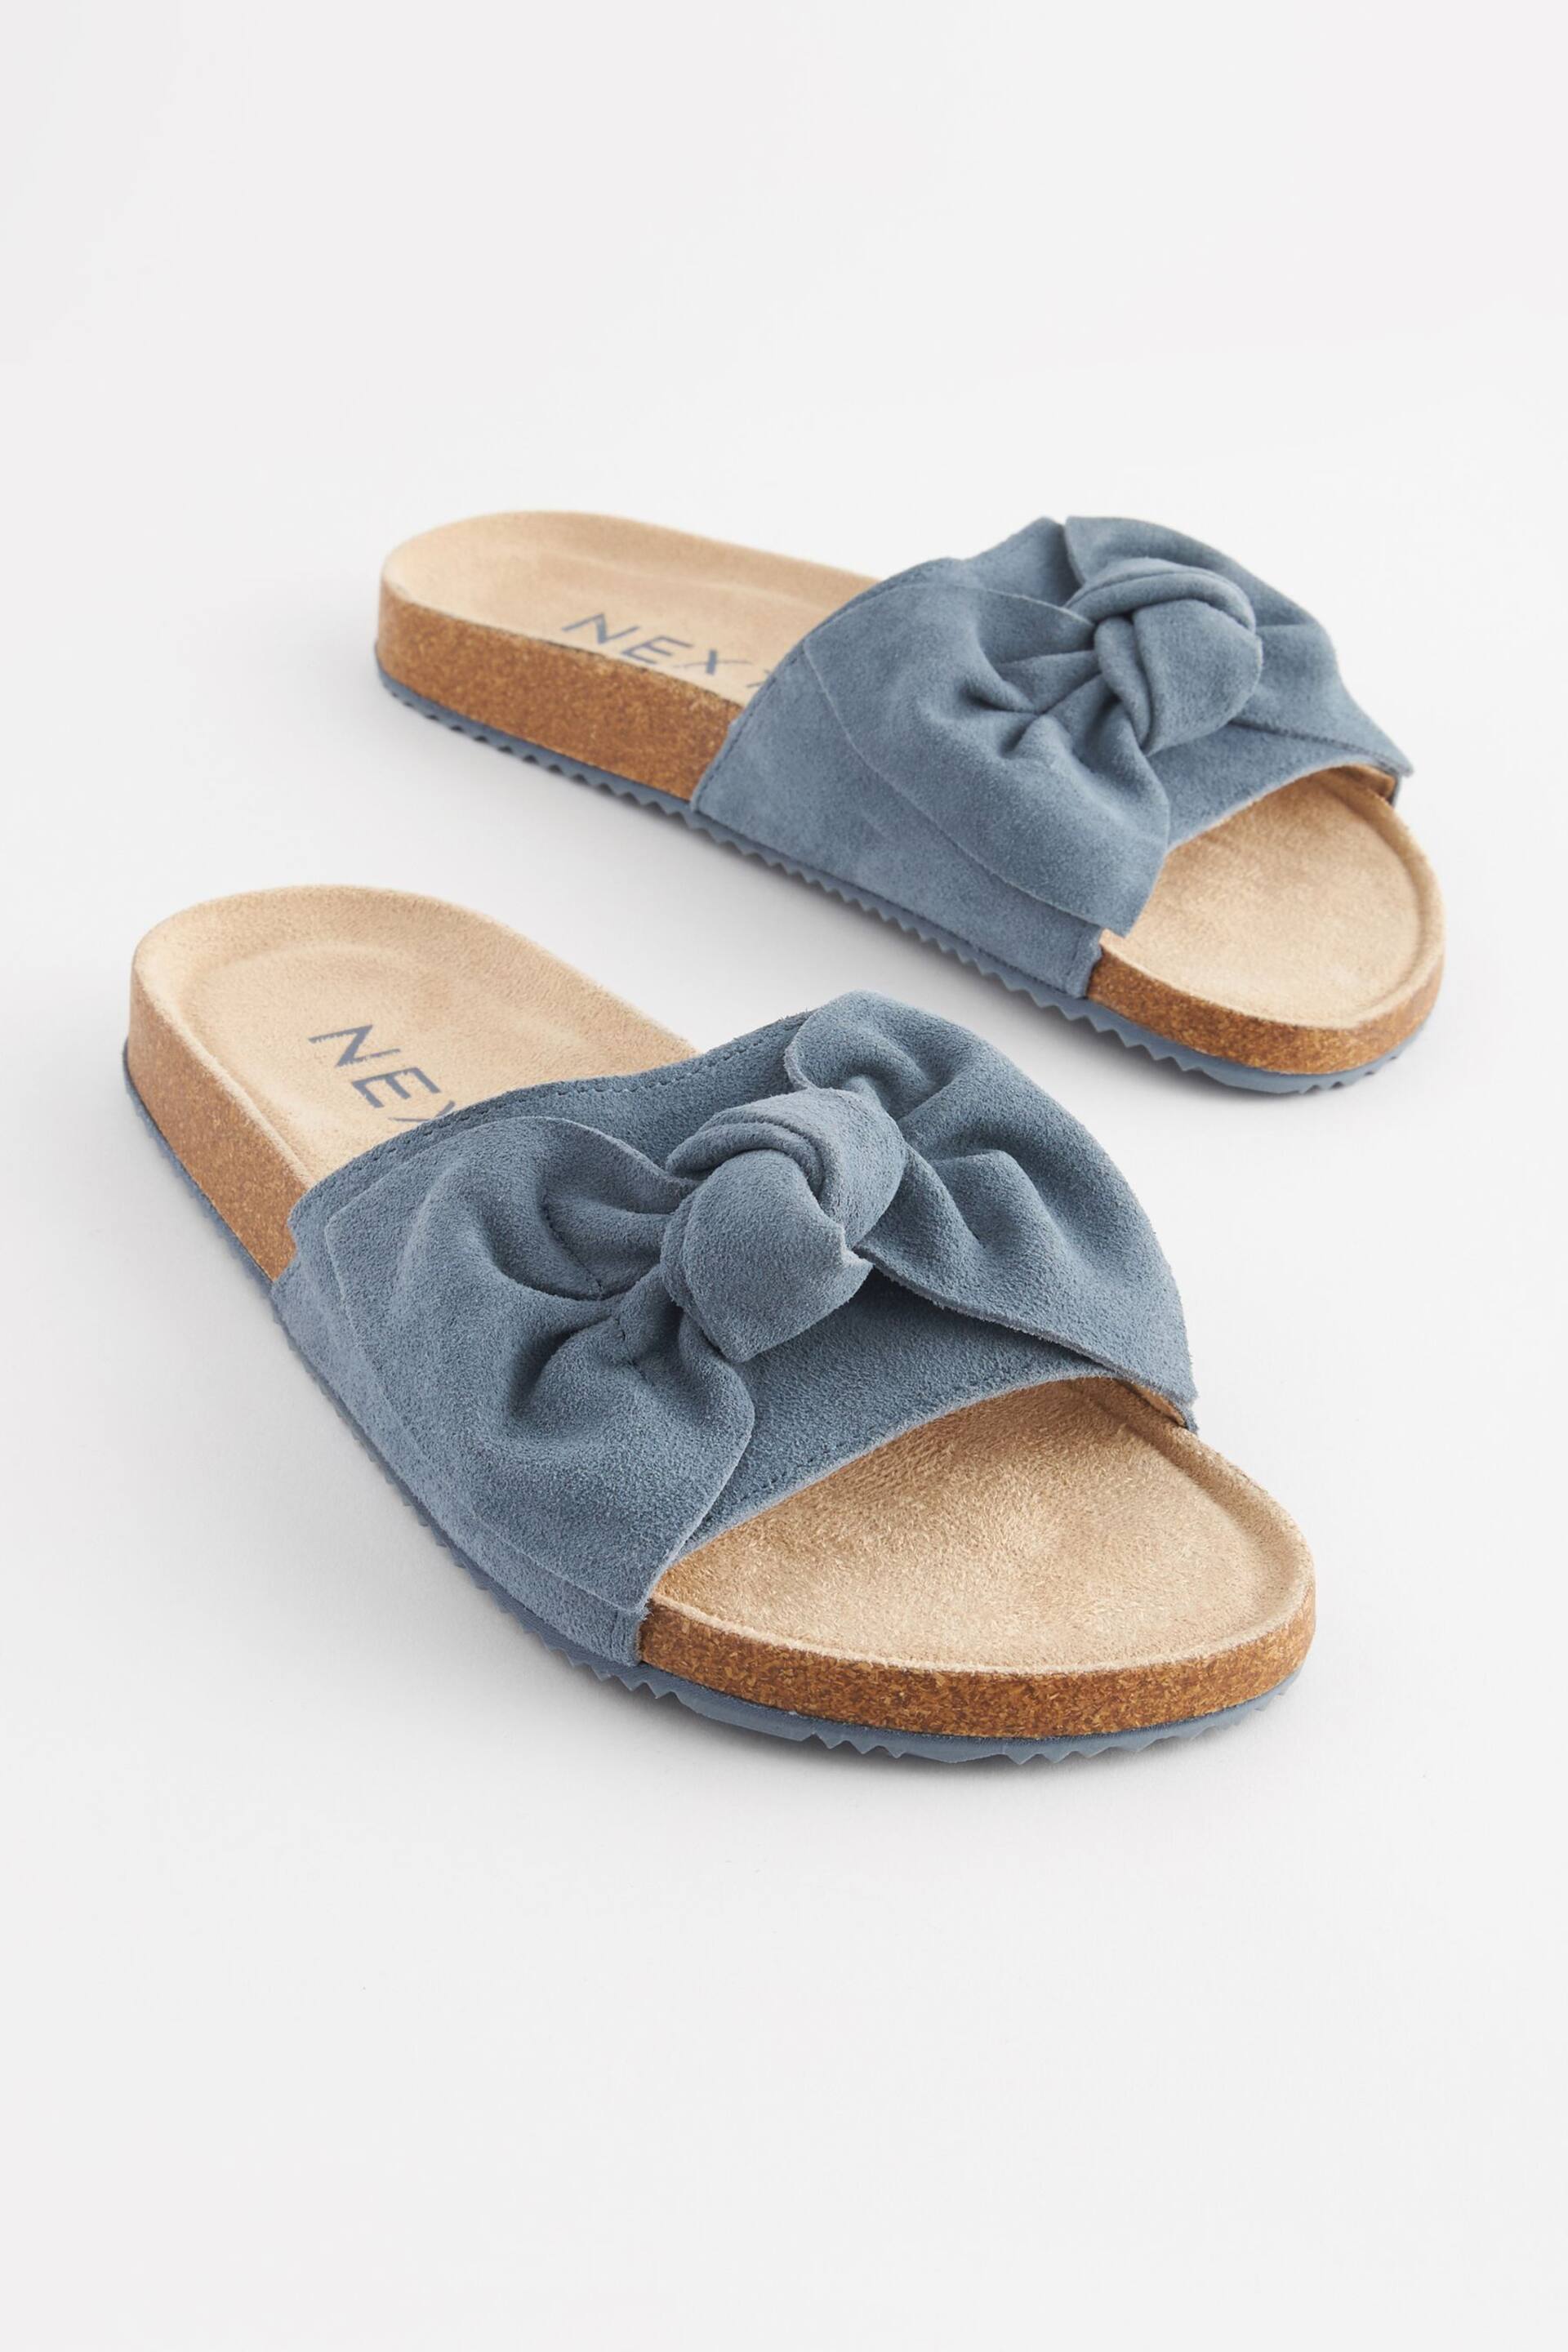 Blue Suede Bow Slider Slippers - Image 3 of 7